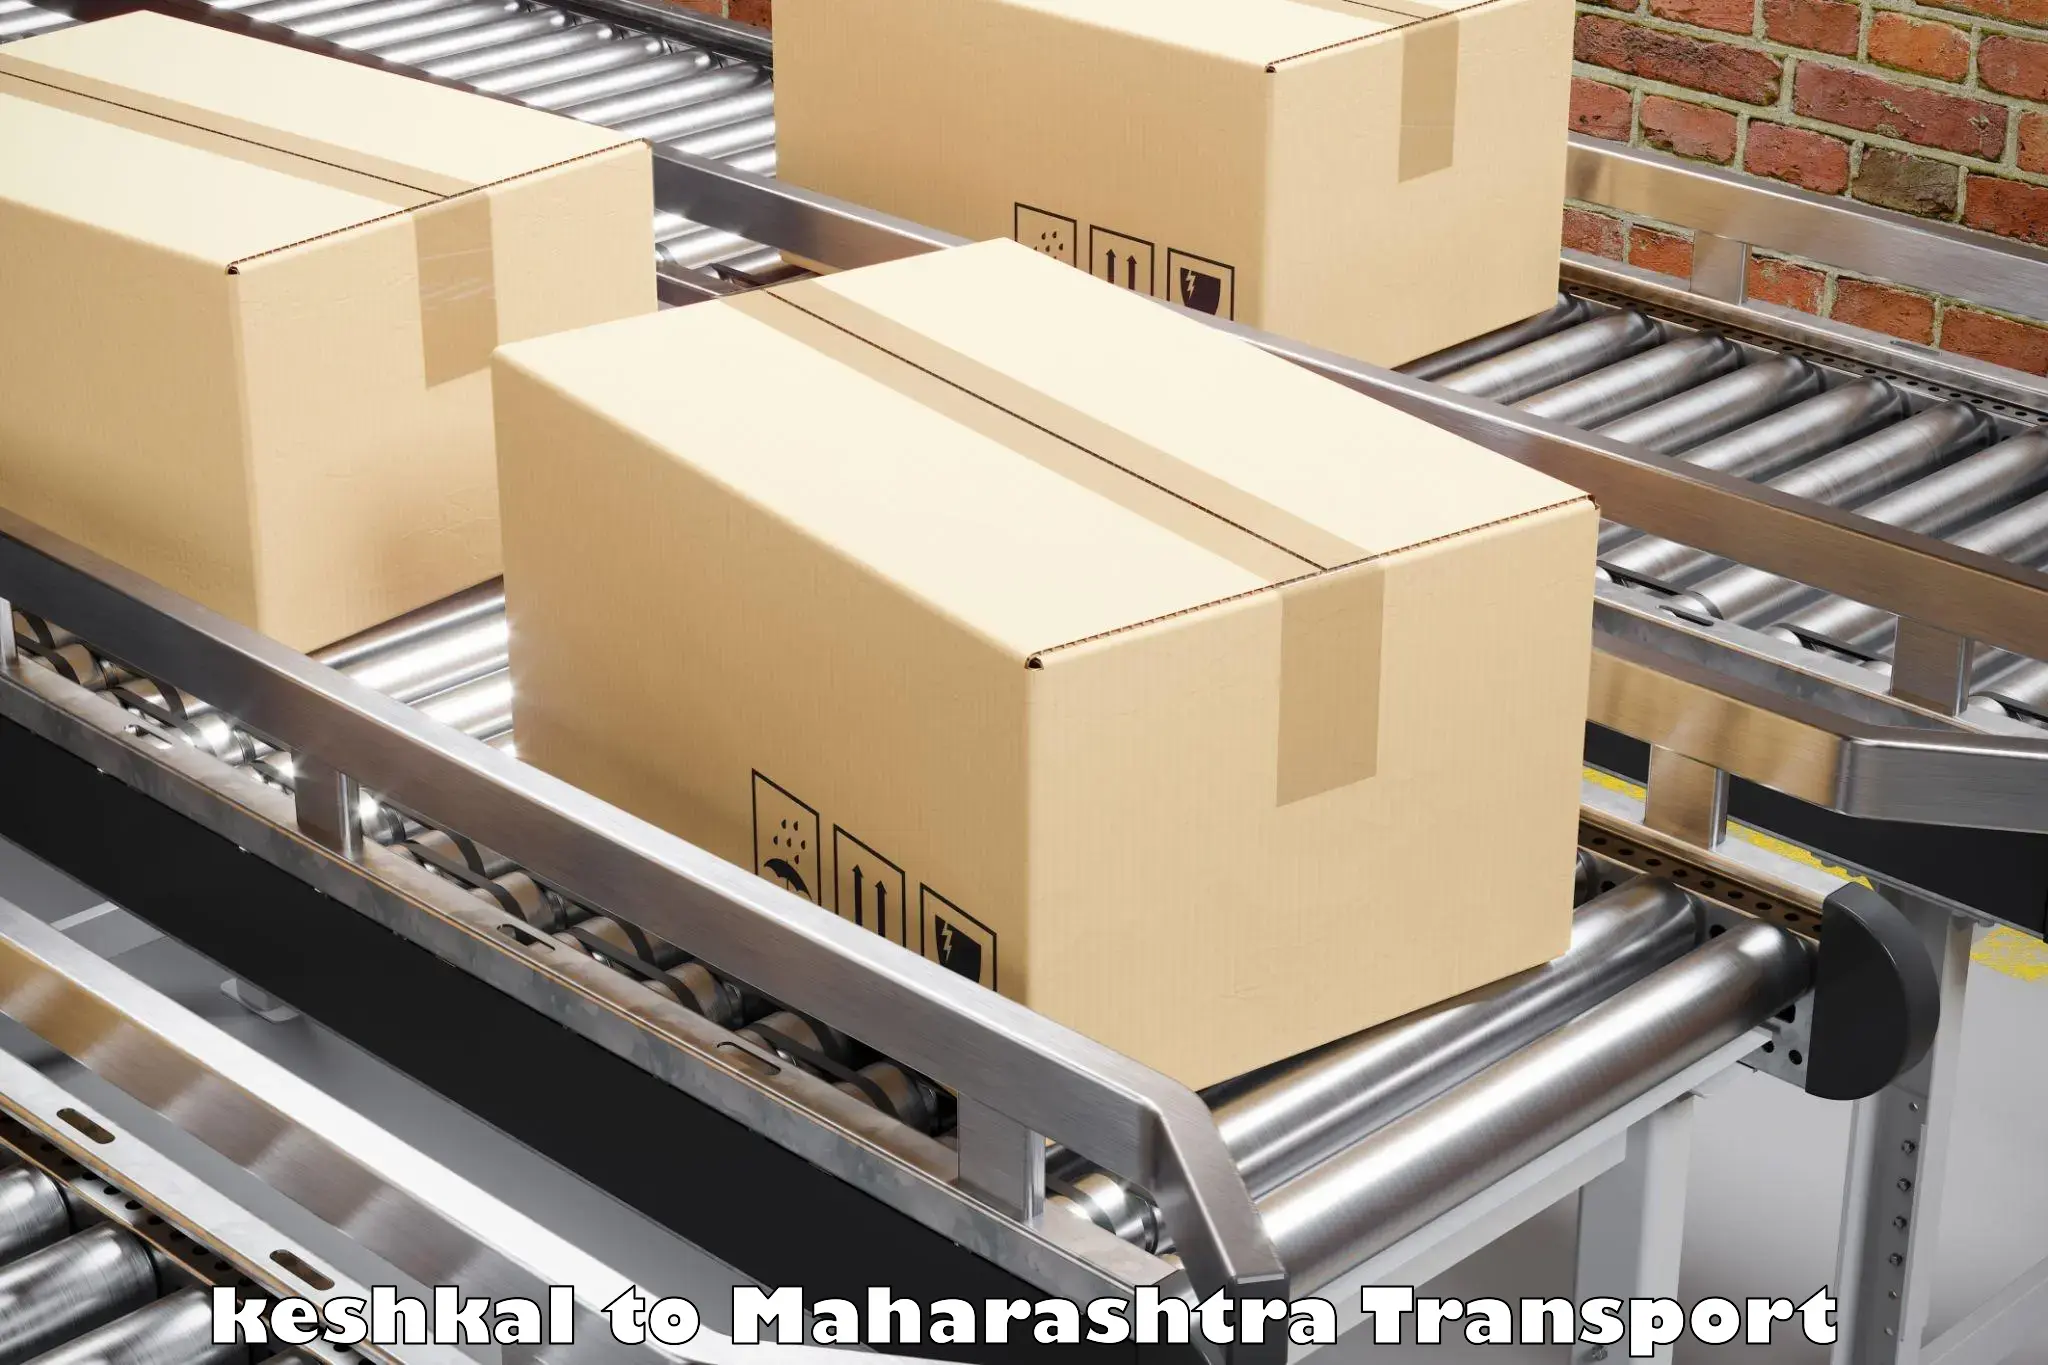 Truck transport companies in India keshkal to Jamkhed